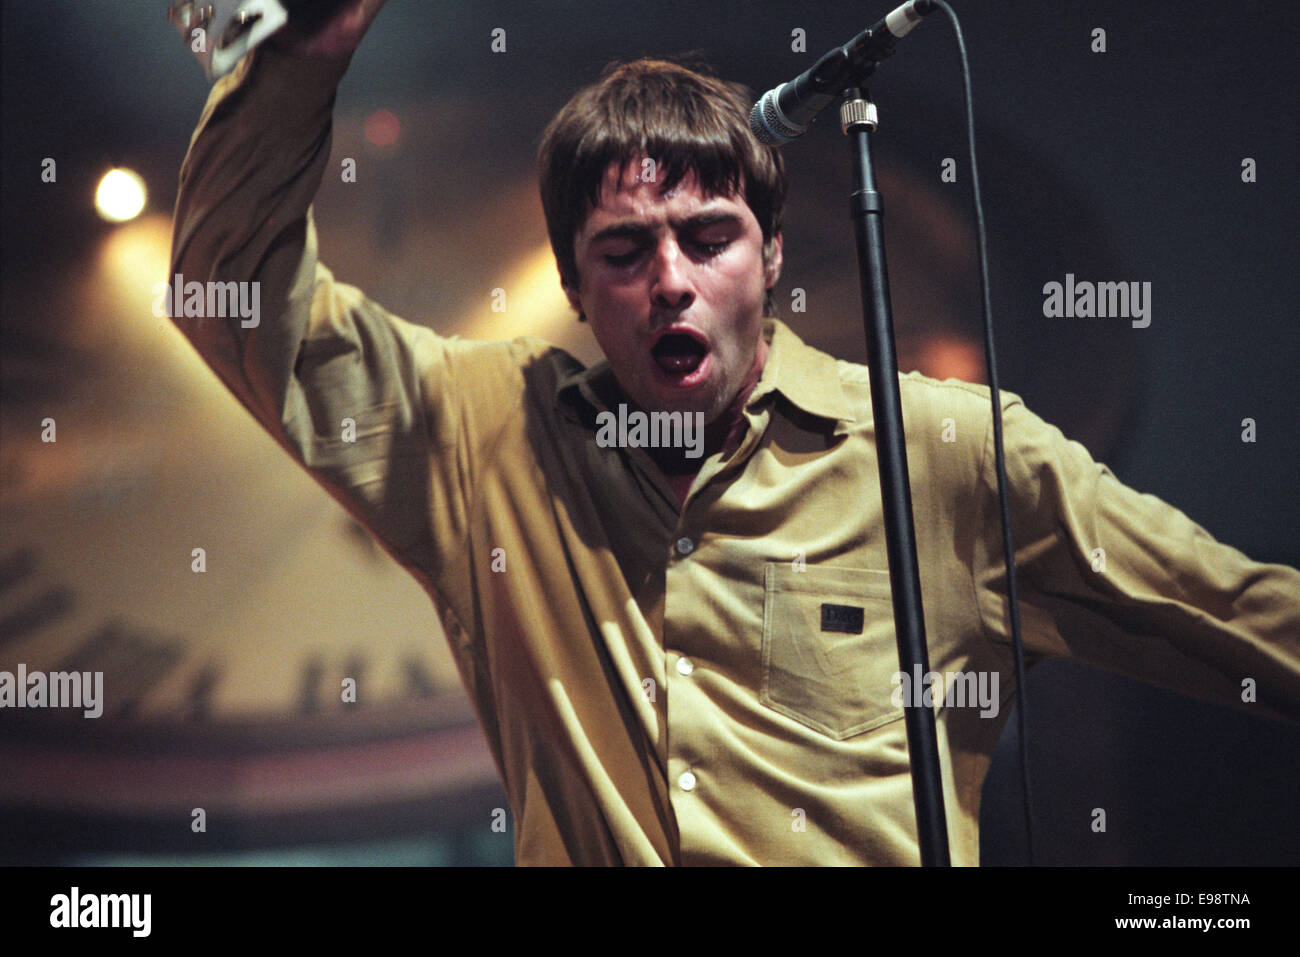 Liam Gallagher and Oasis in Aberdeen, Scotland, 1997. Stock Photo